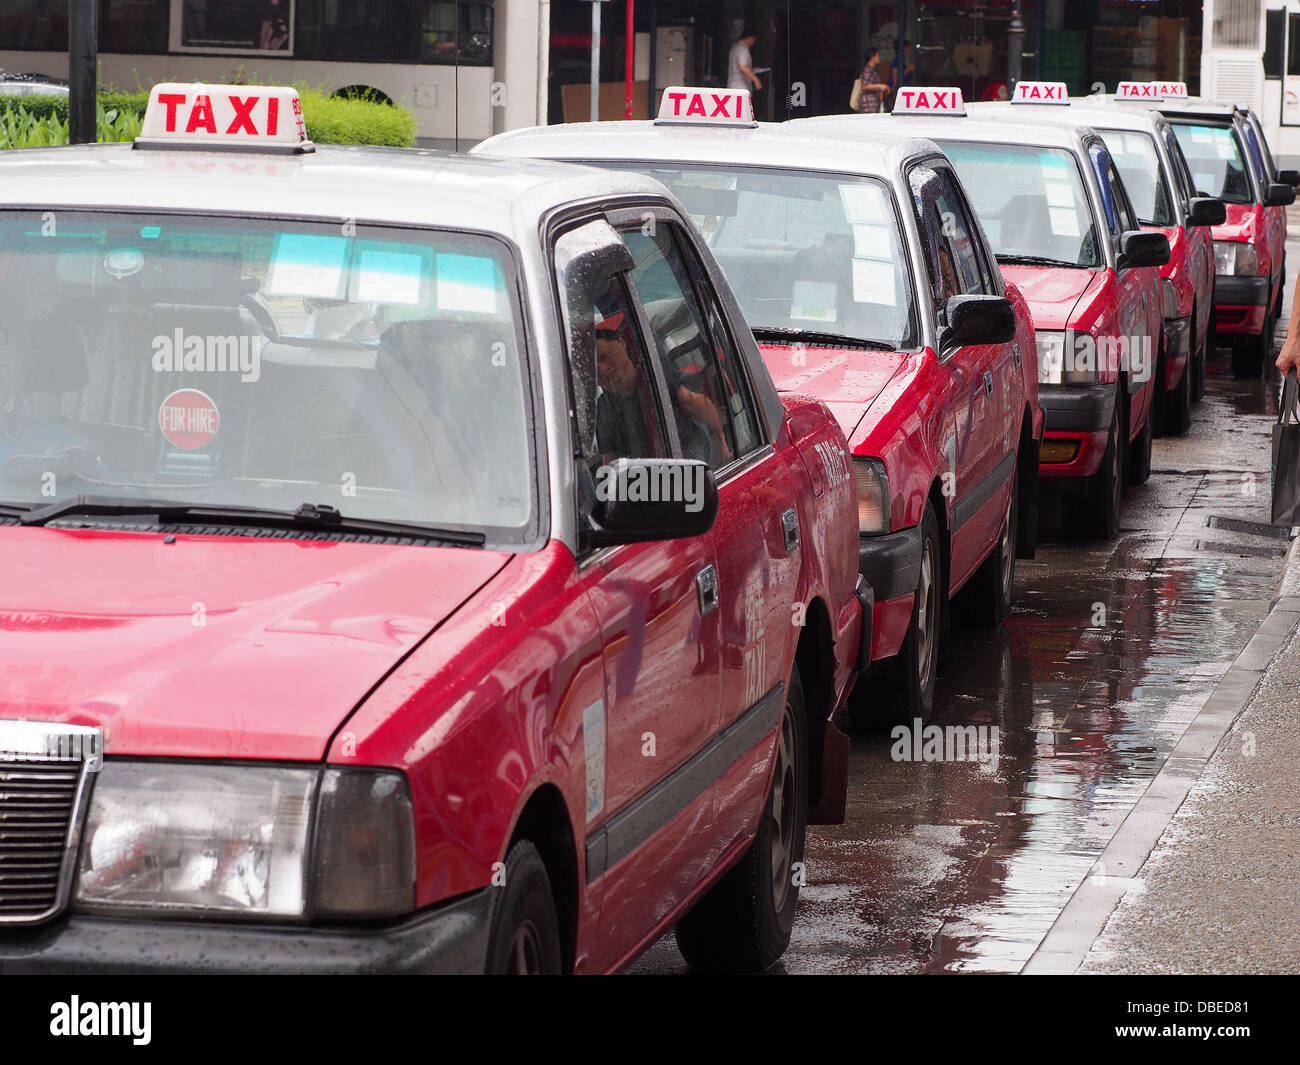 Line of Hong Kong taxis queuing Stock Photo